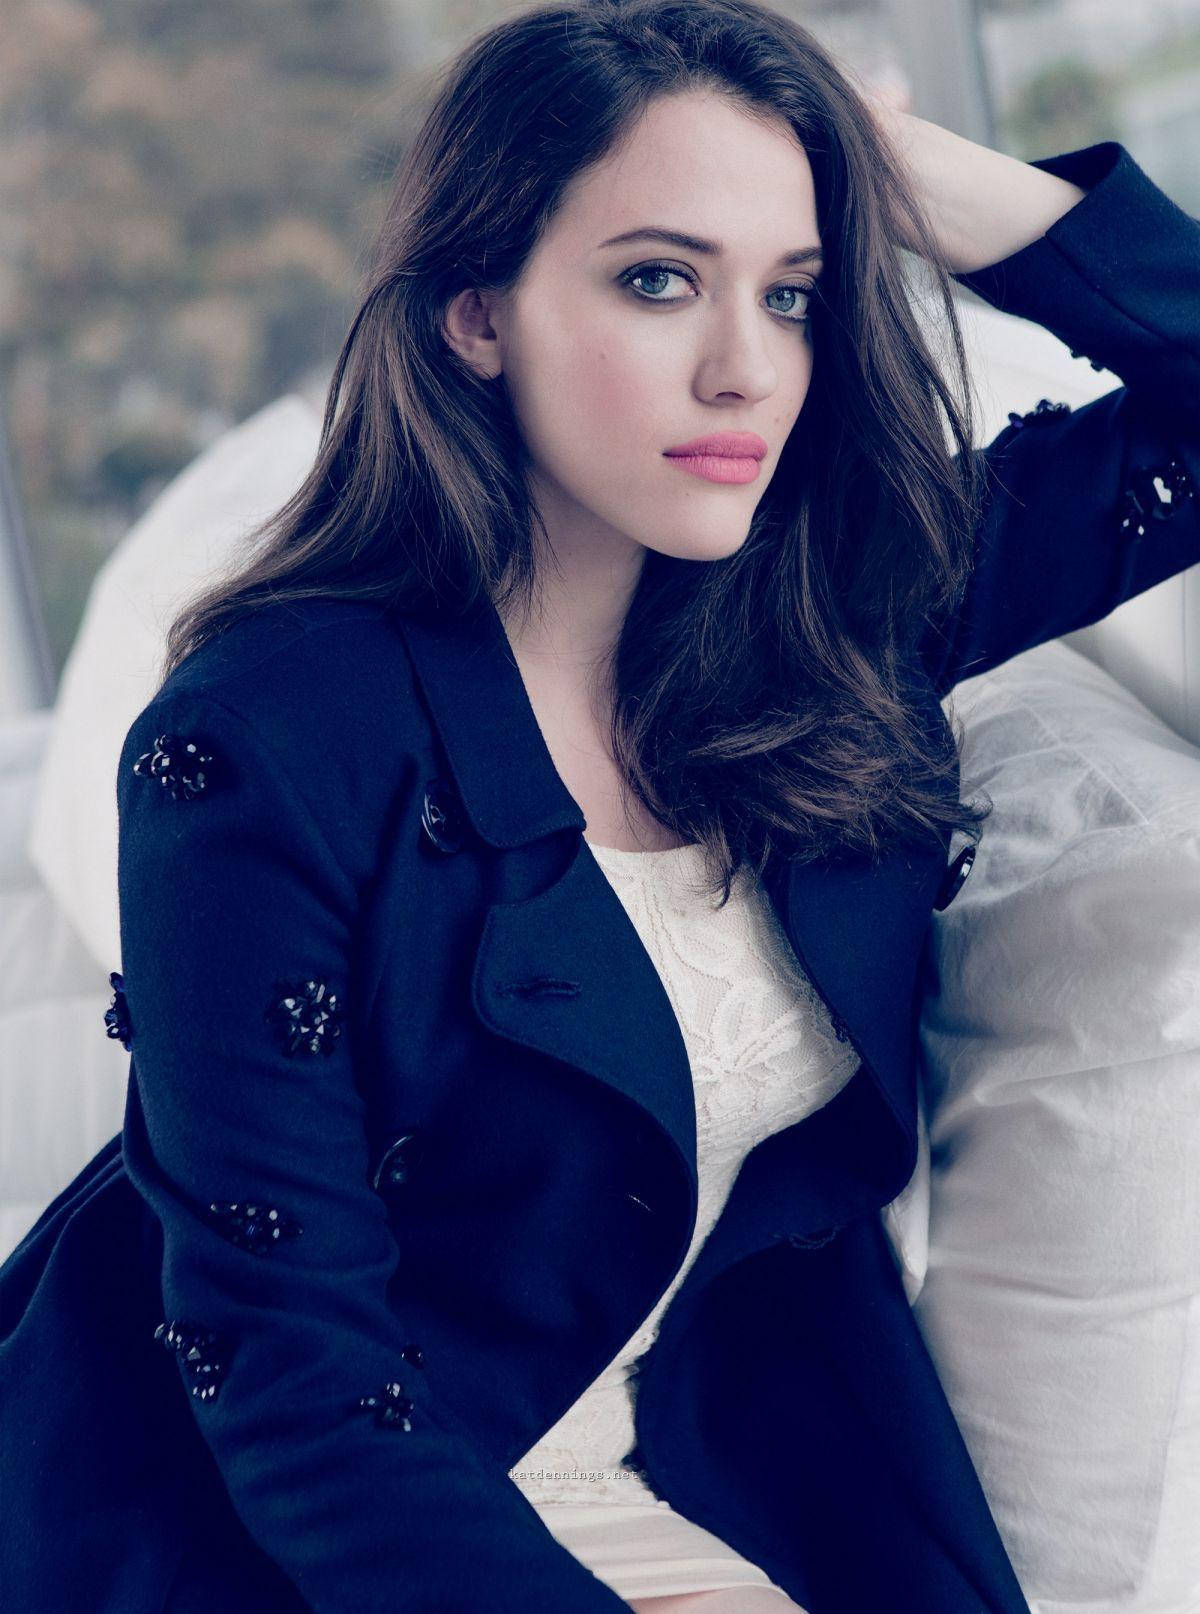 Kat Dennings Leaning On Couch 2014 Photoshoot Background